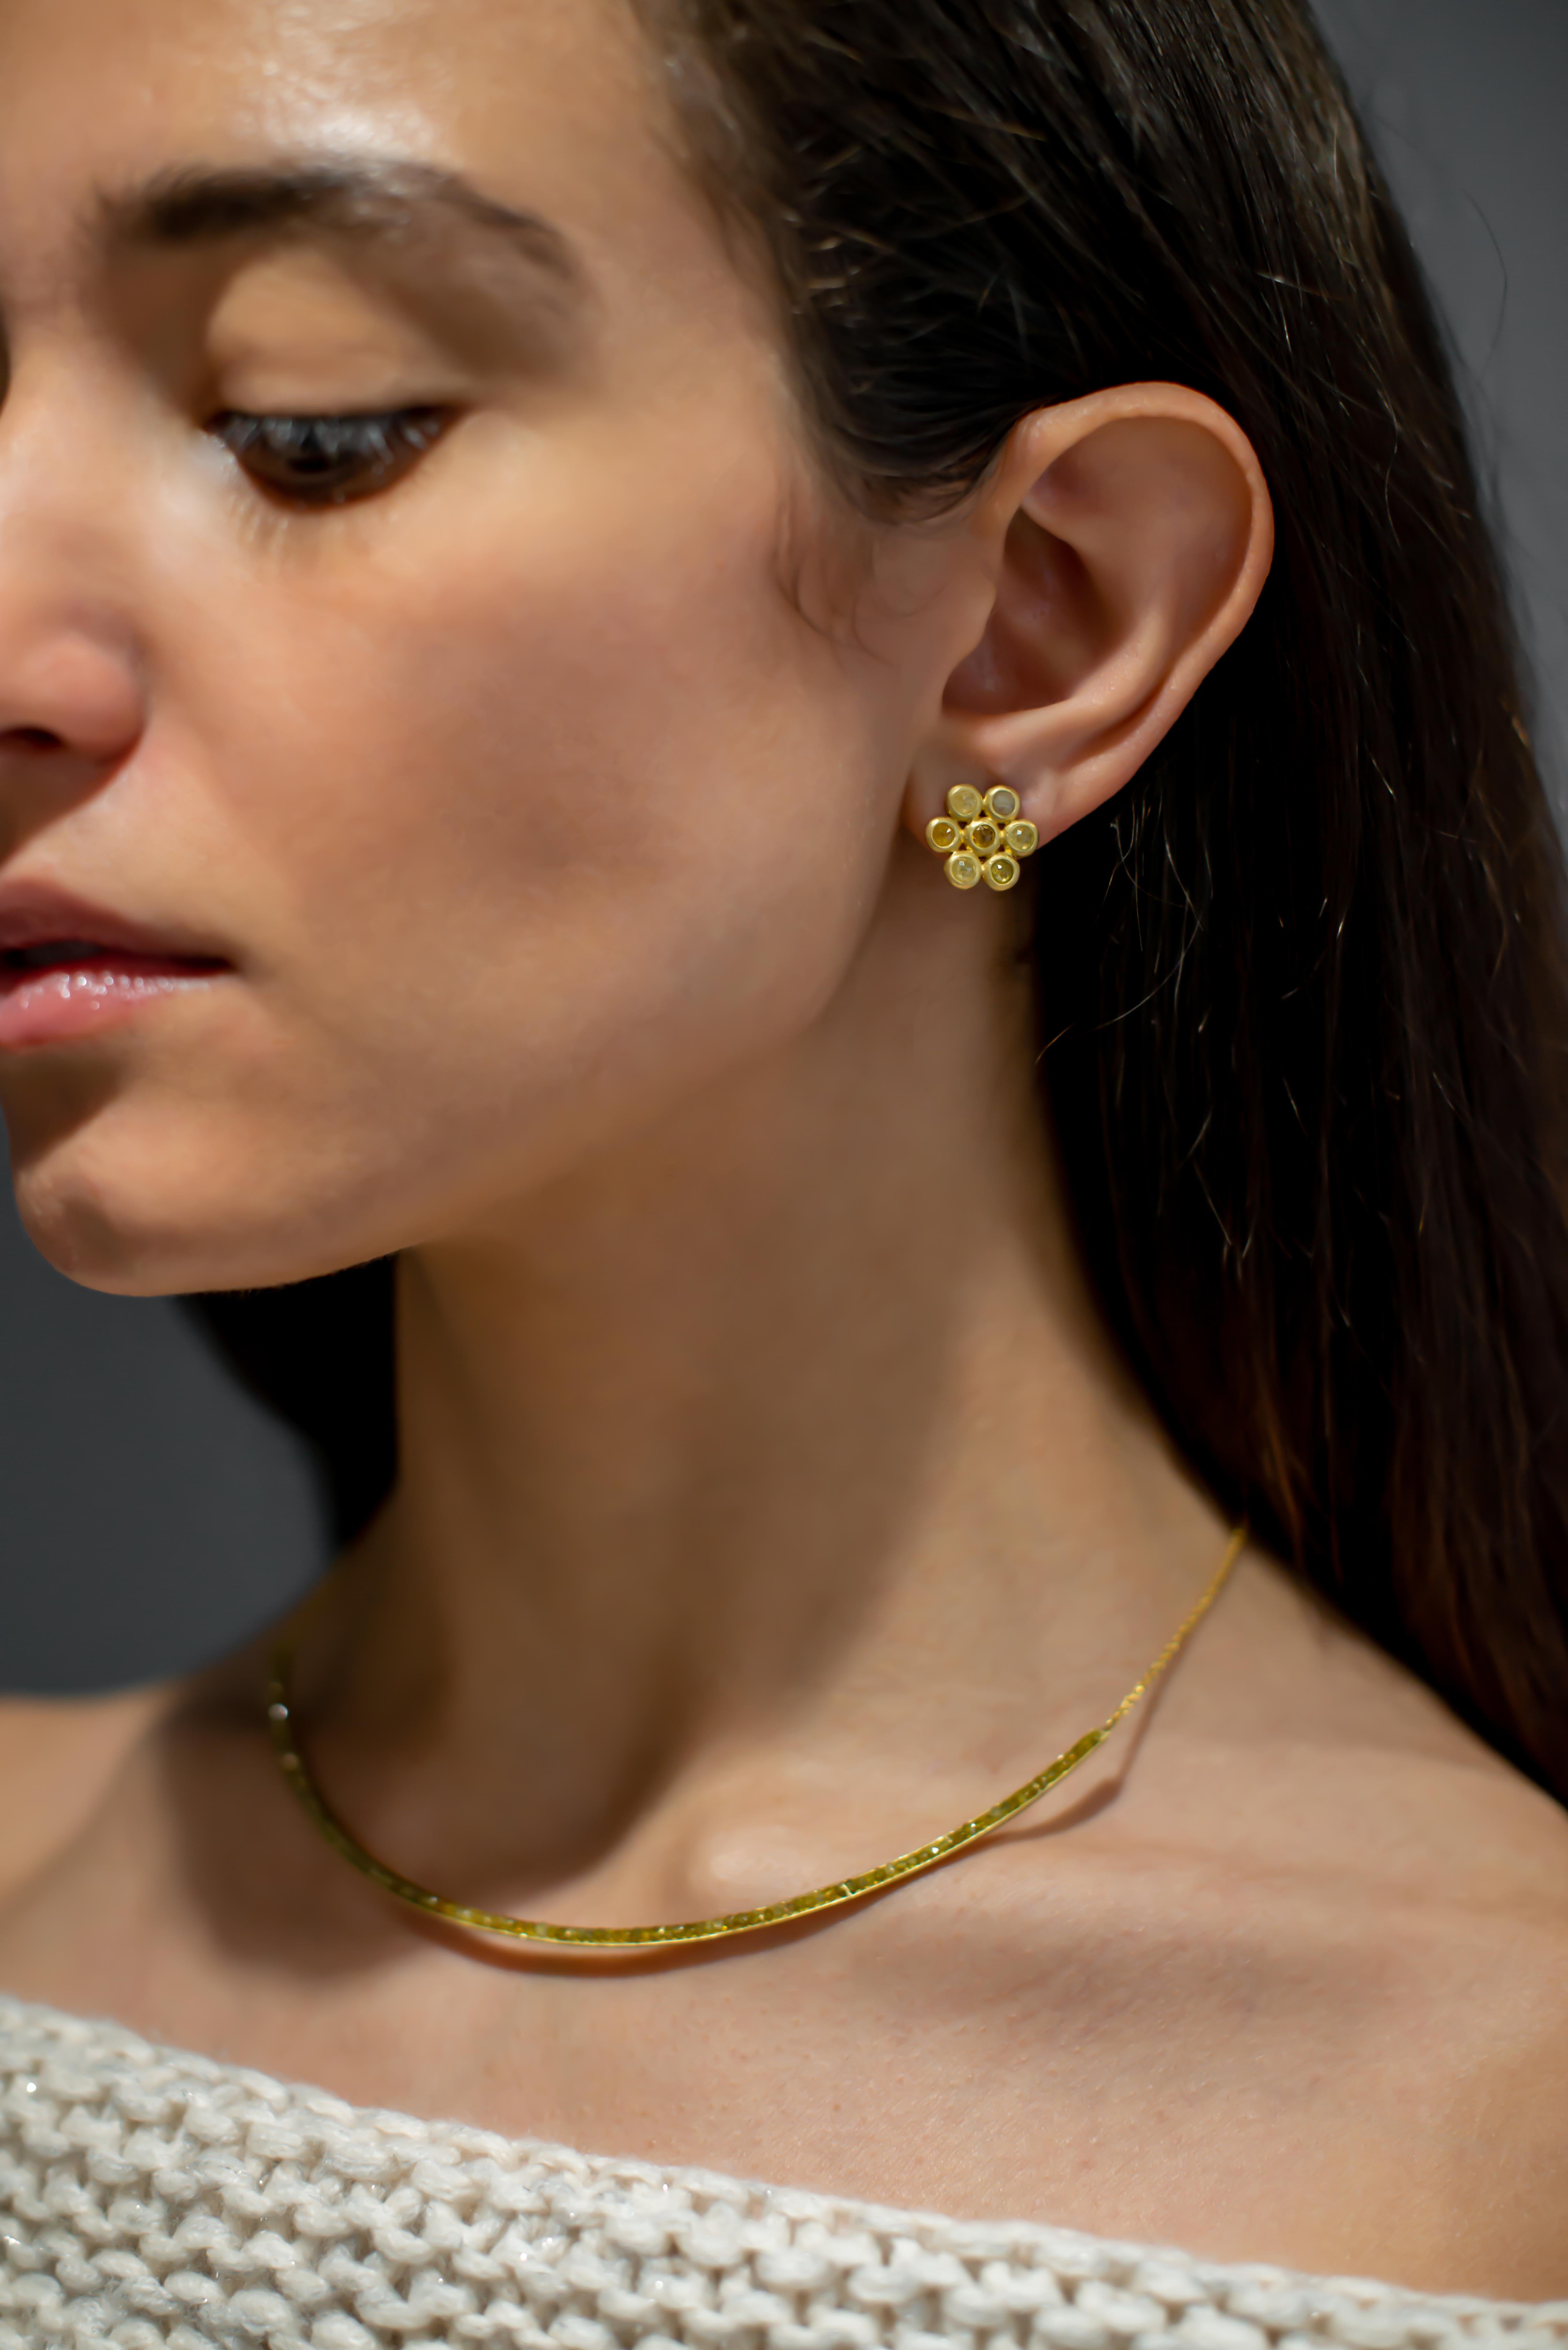 Faye Kim's signature Daisy design has two earrings in one.  The pearl drops are detachable allowing the diamond earrings to be worn on their worn as diamond studs.  

Each pair is unique with slight variations in color and style.  Model photos show